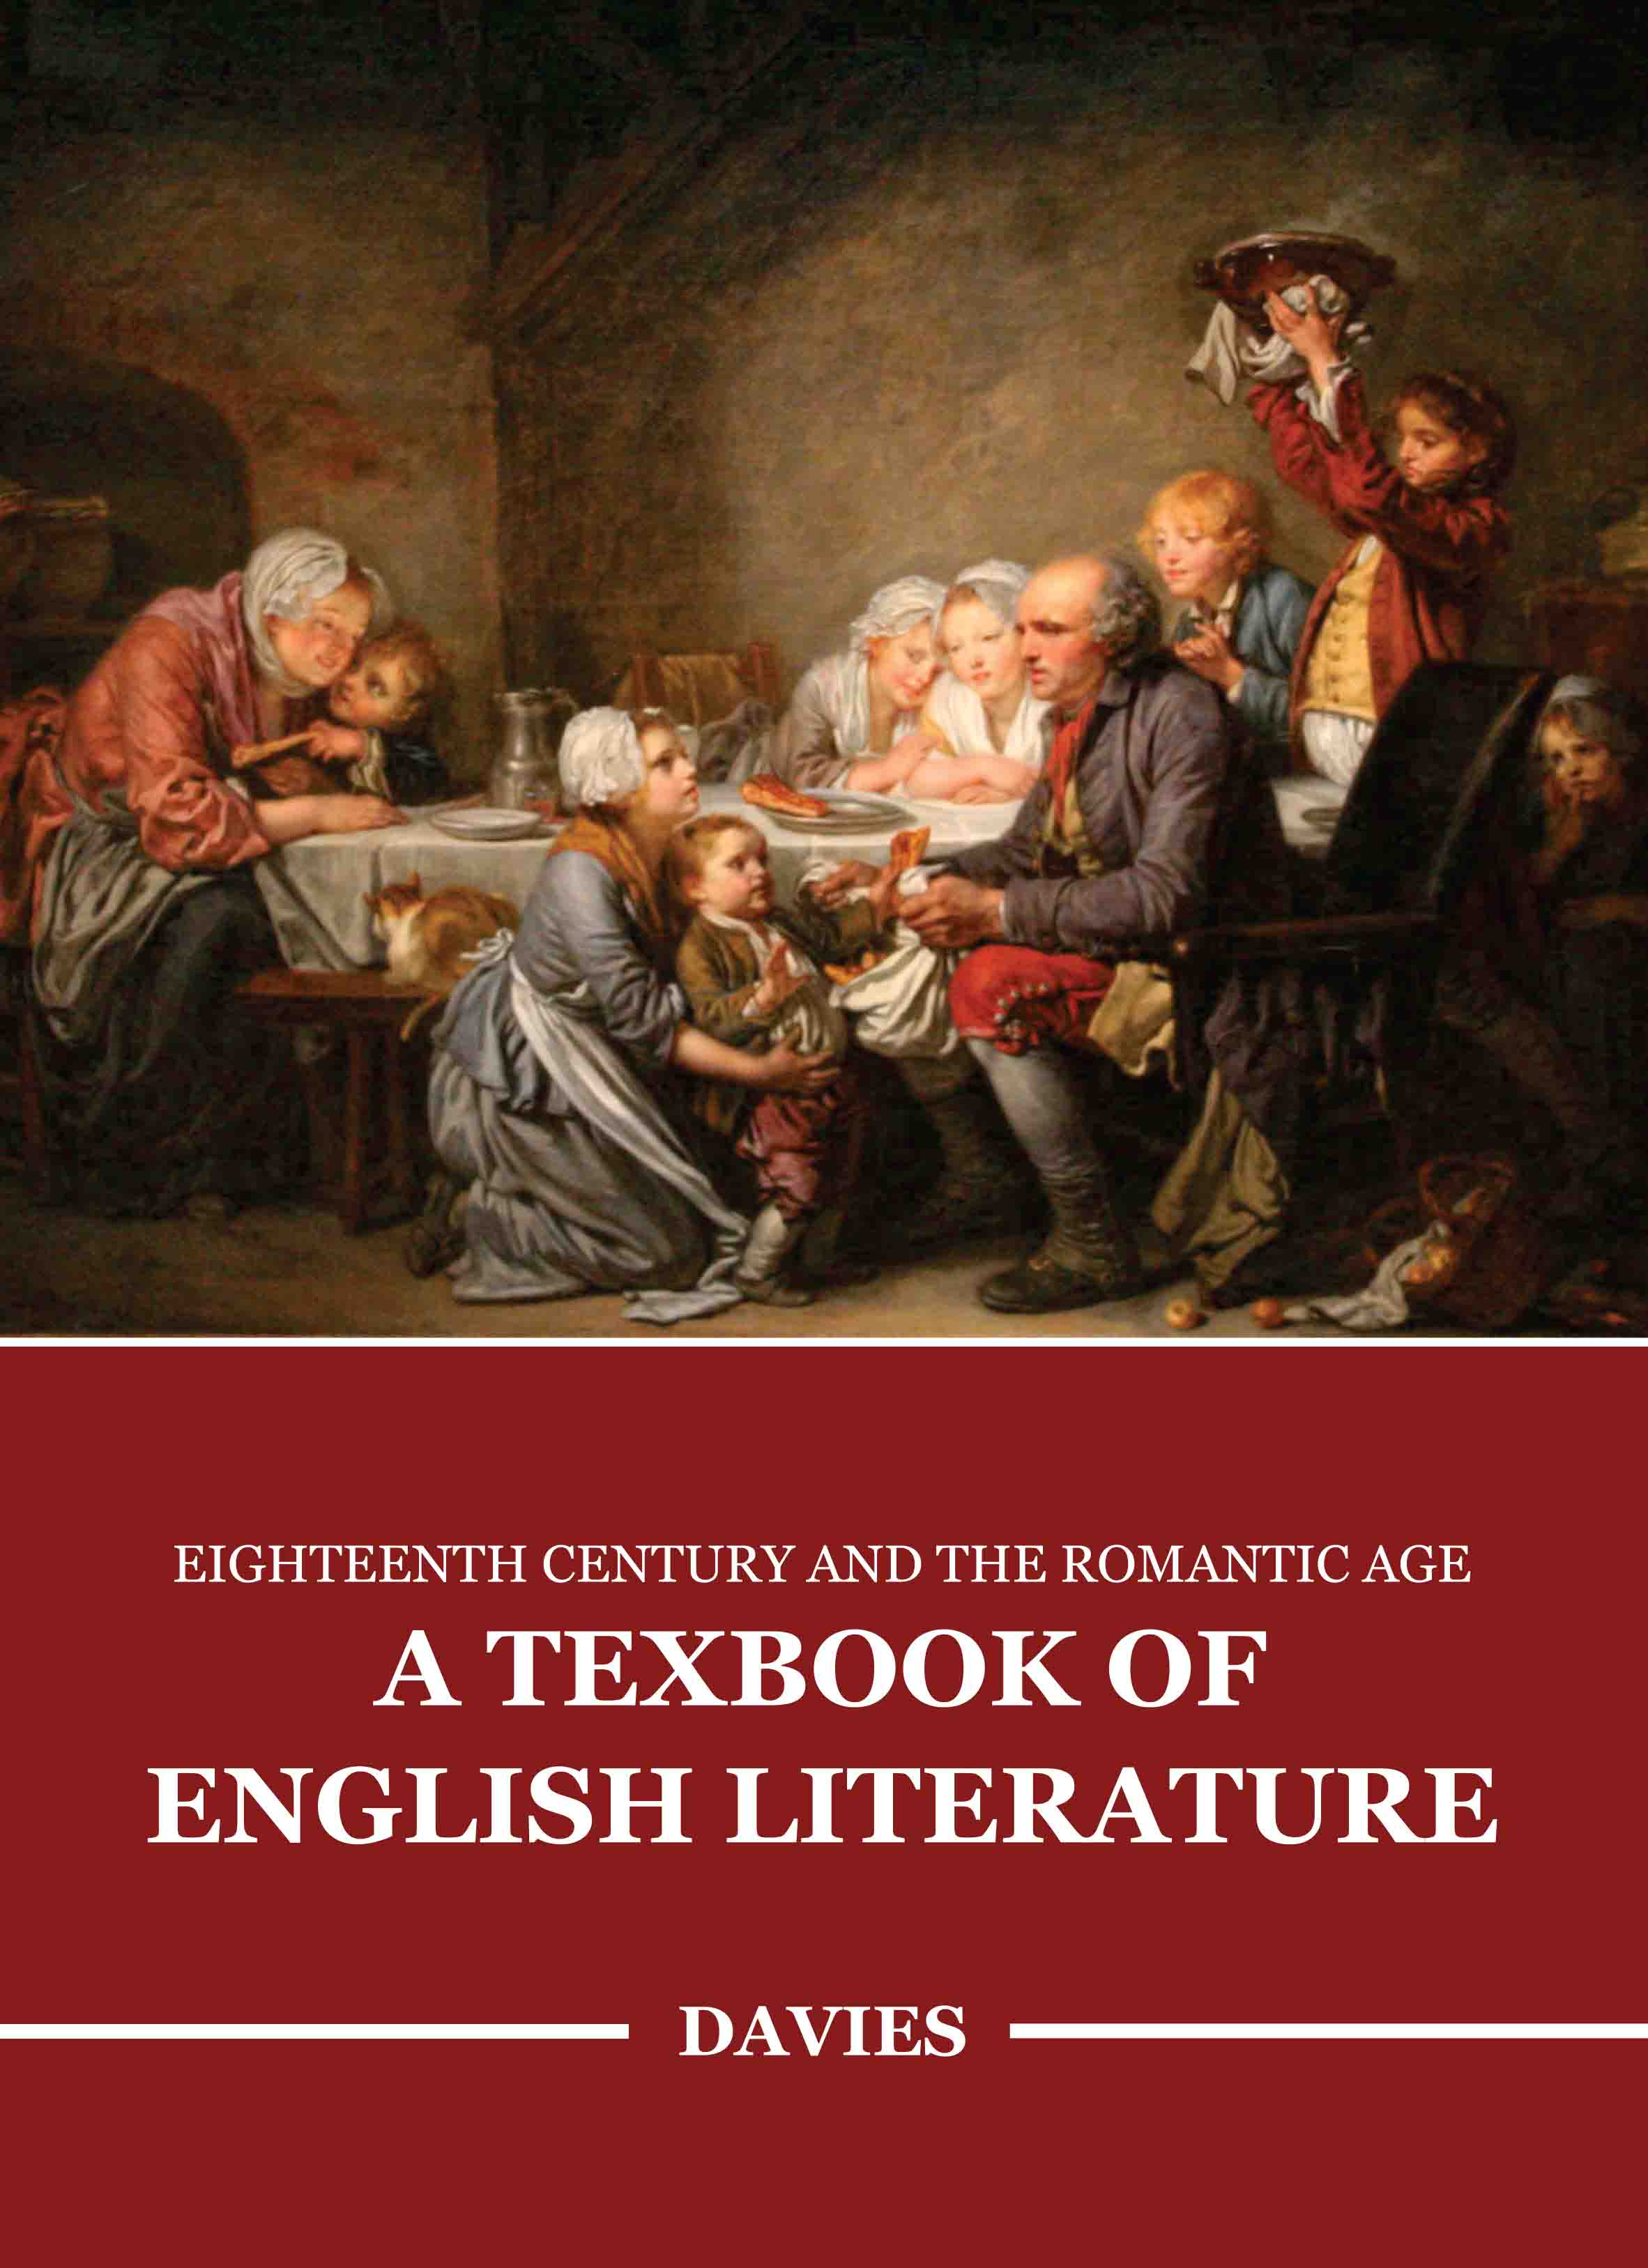 Eighteenth Century and The Romantic Age: A Texbook of English Literature